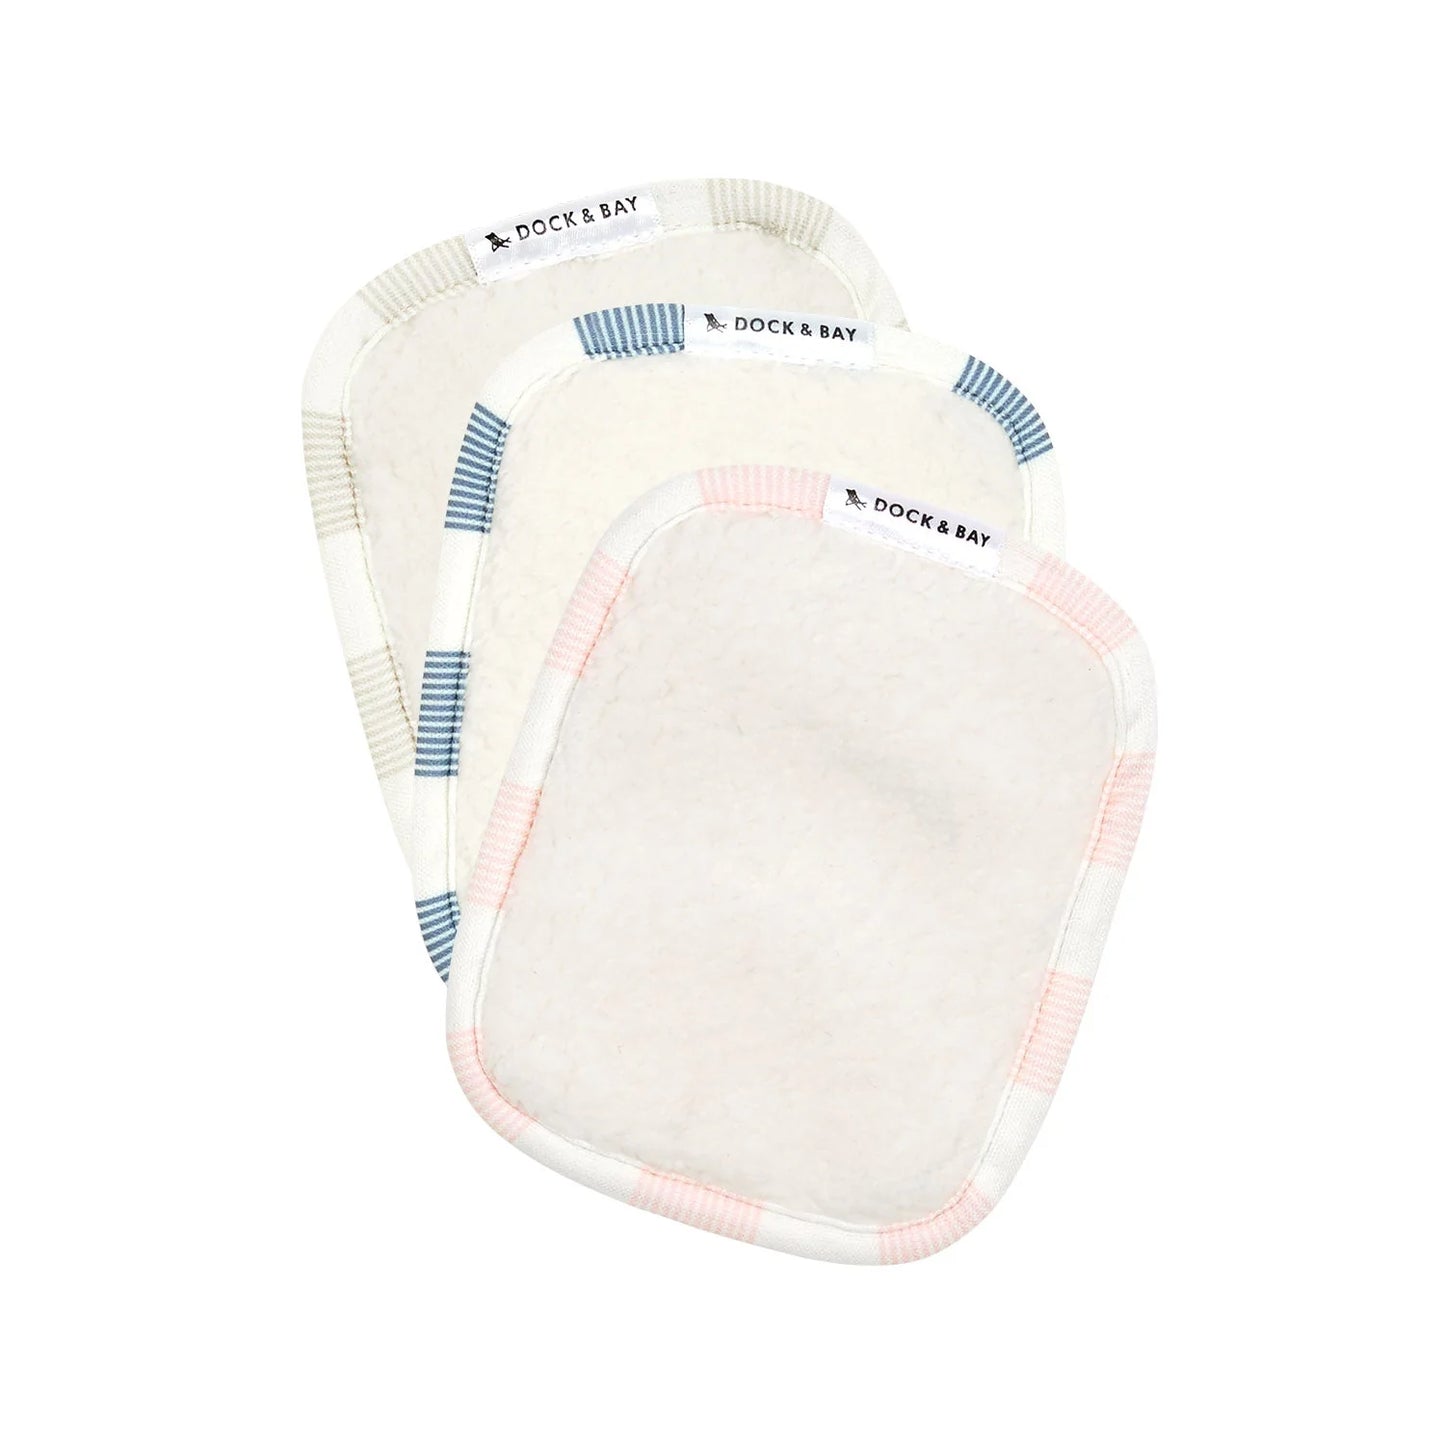 Dock and Bay Reusable Makeup Removers (3-Pack)